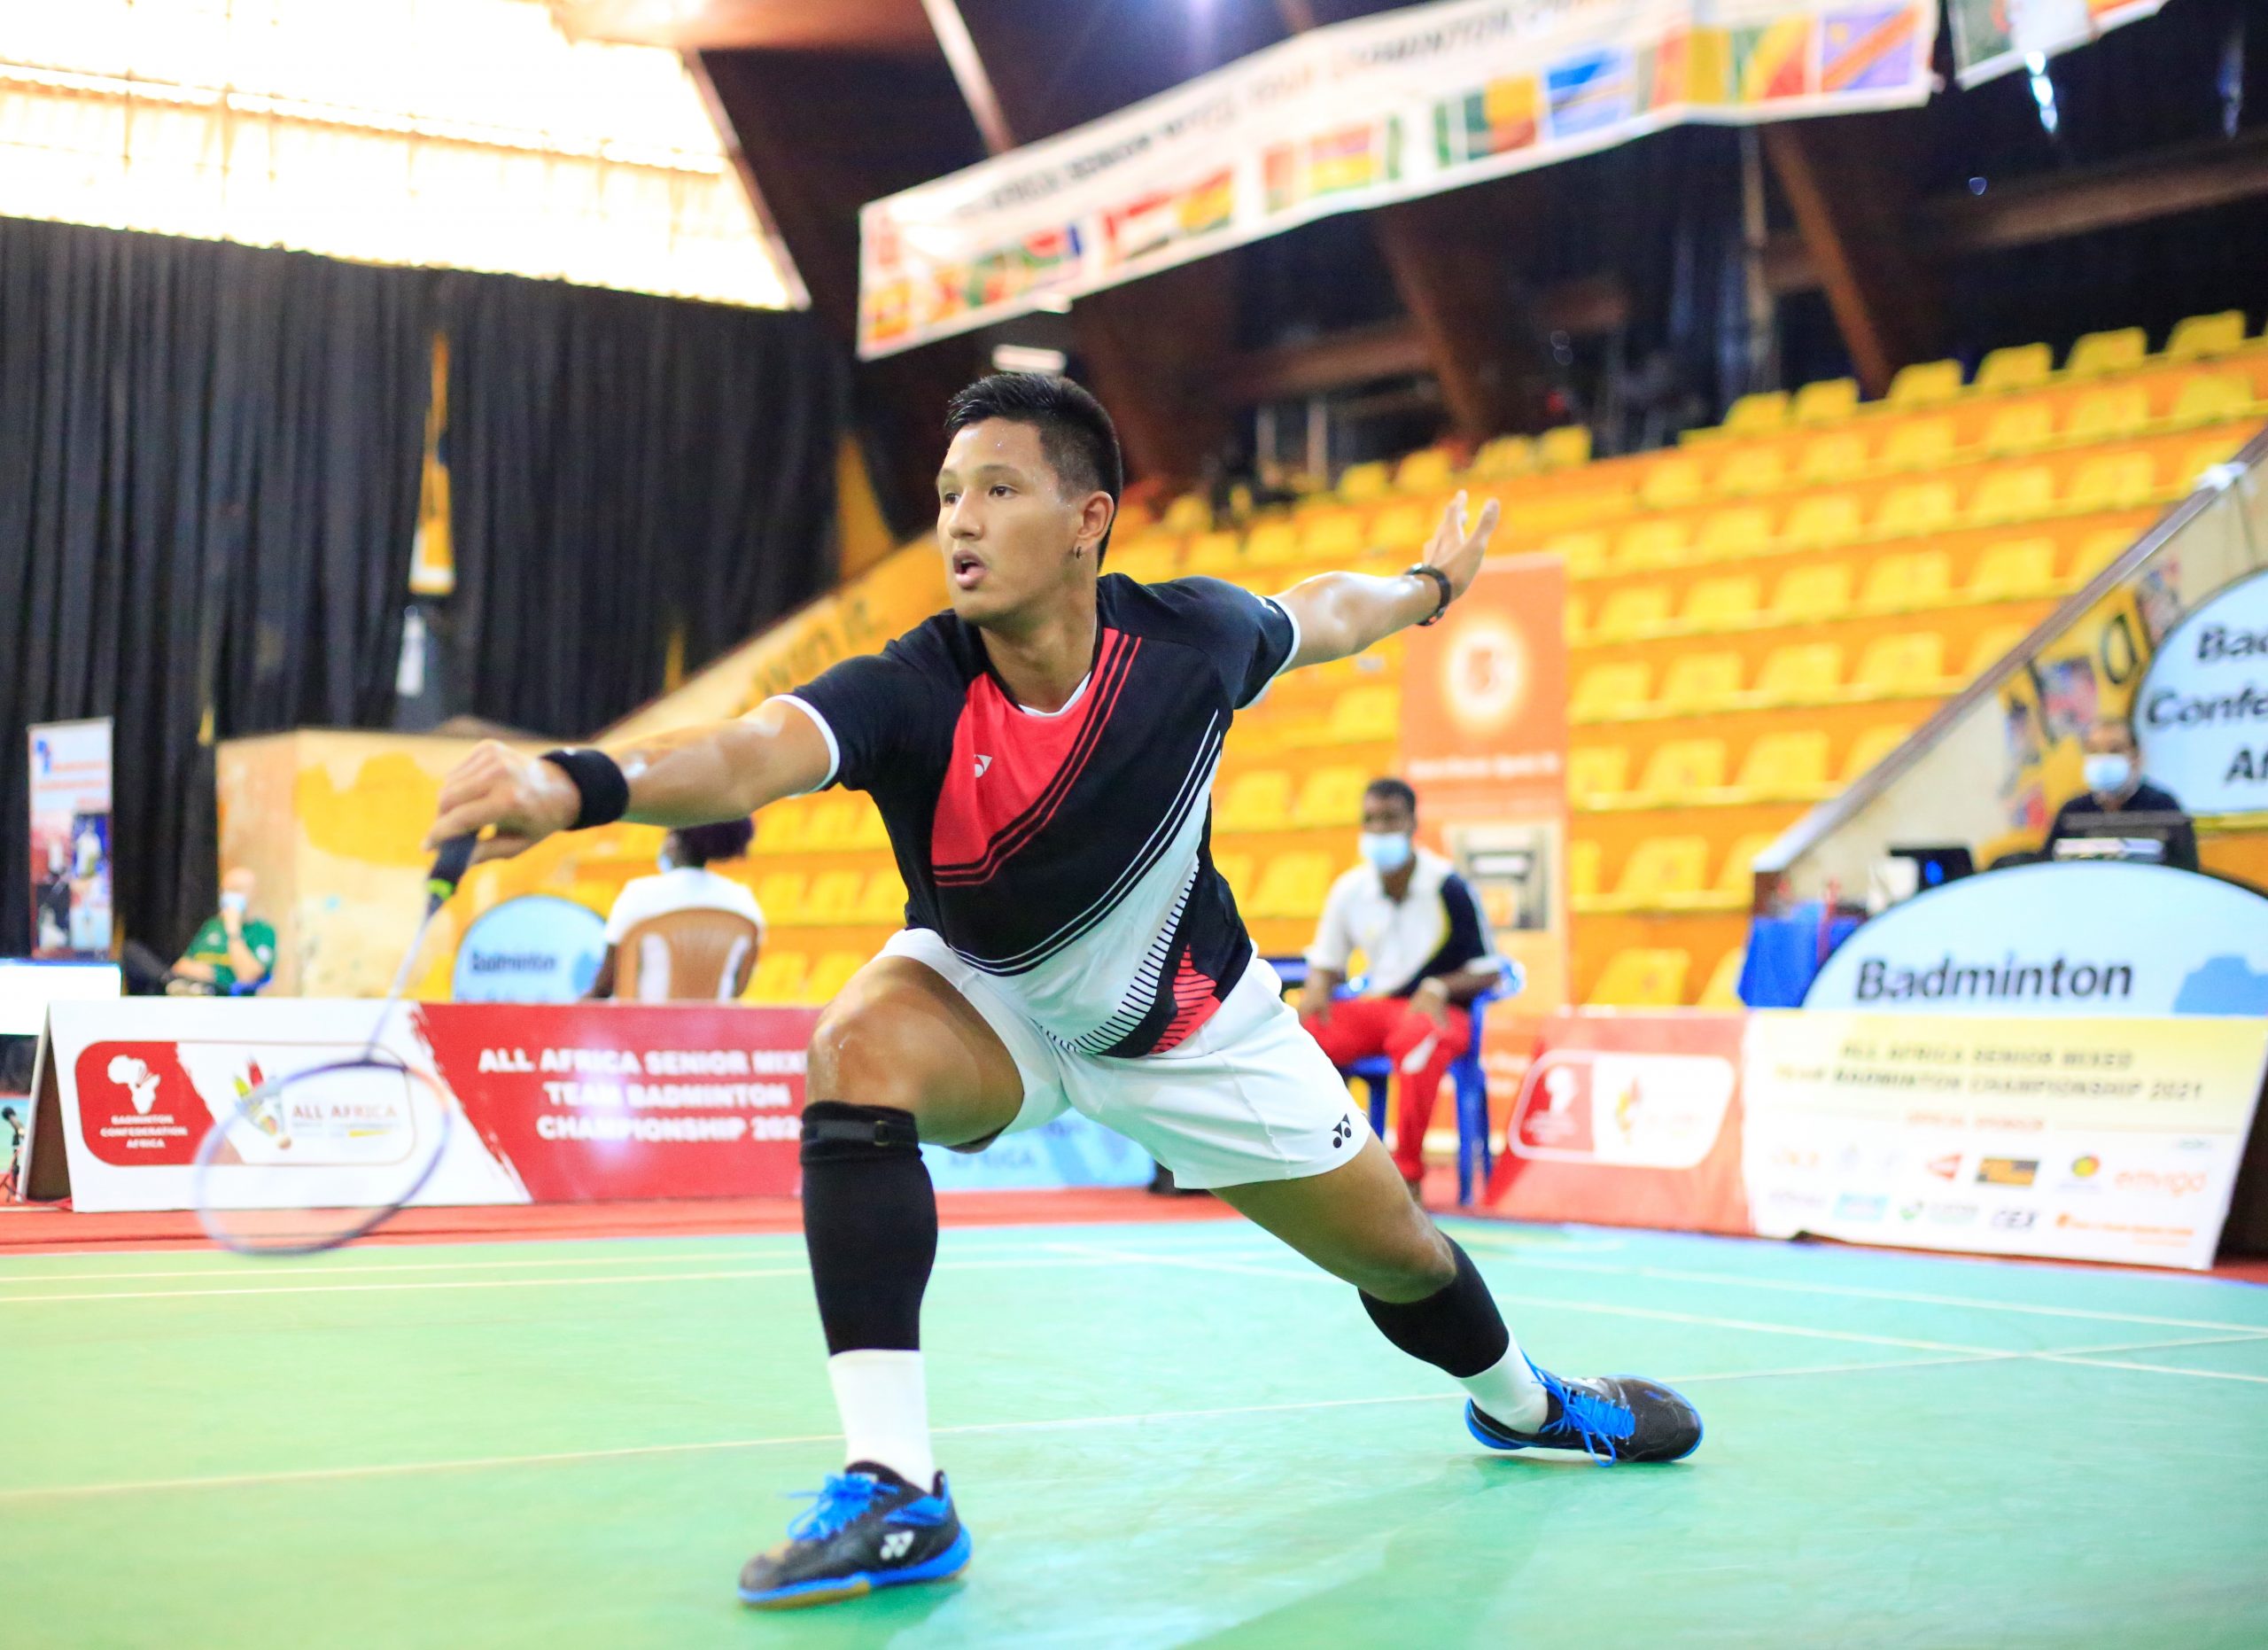 Top player Julien Paul out of All Africa Senior Badminton Championship - At a glance